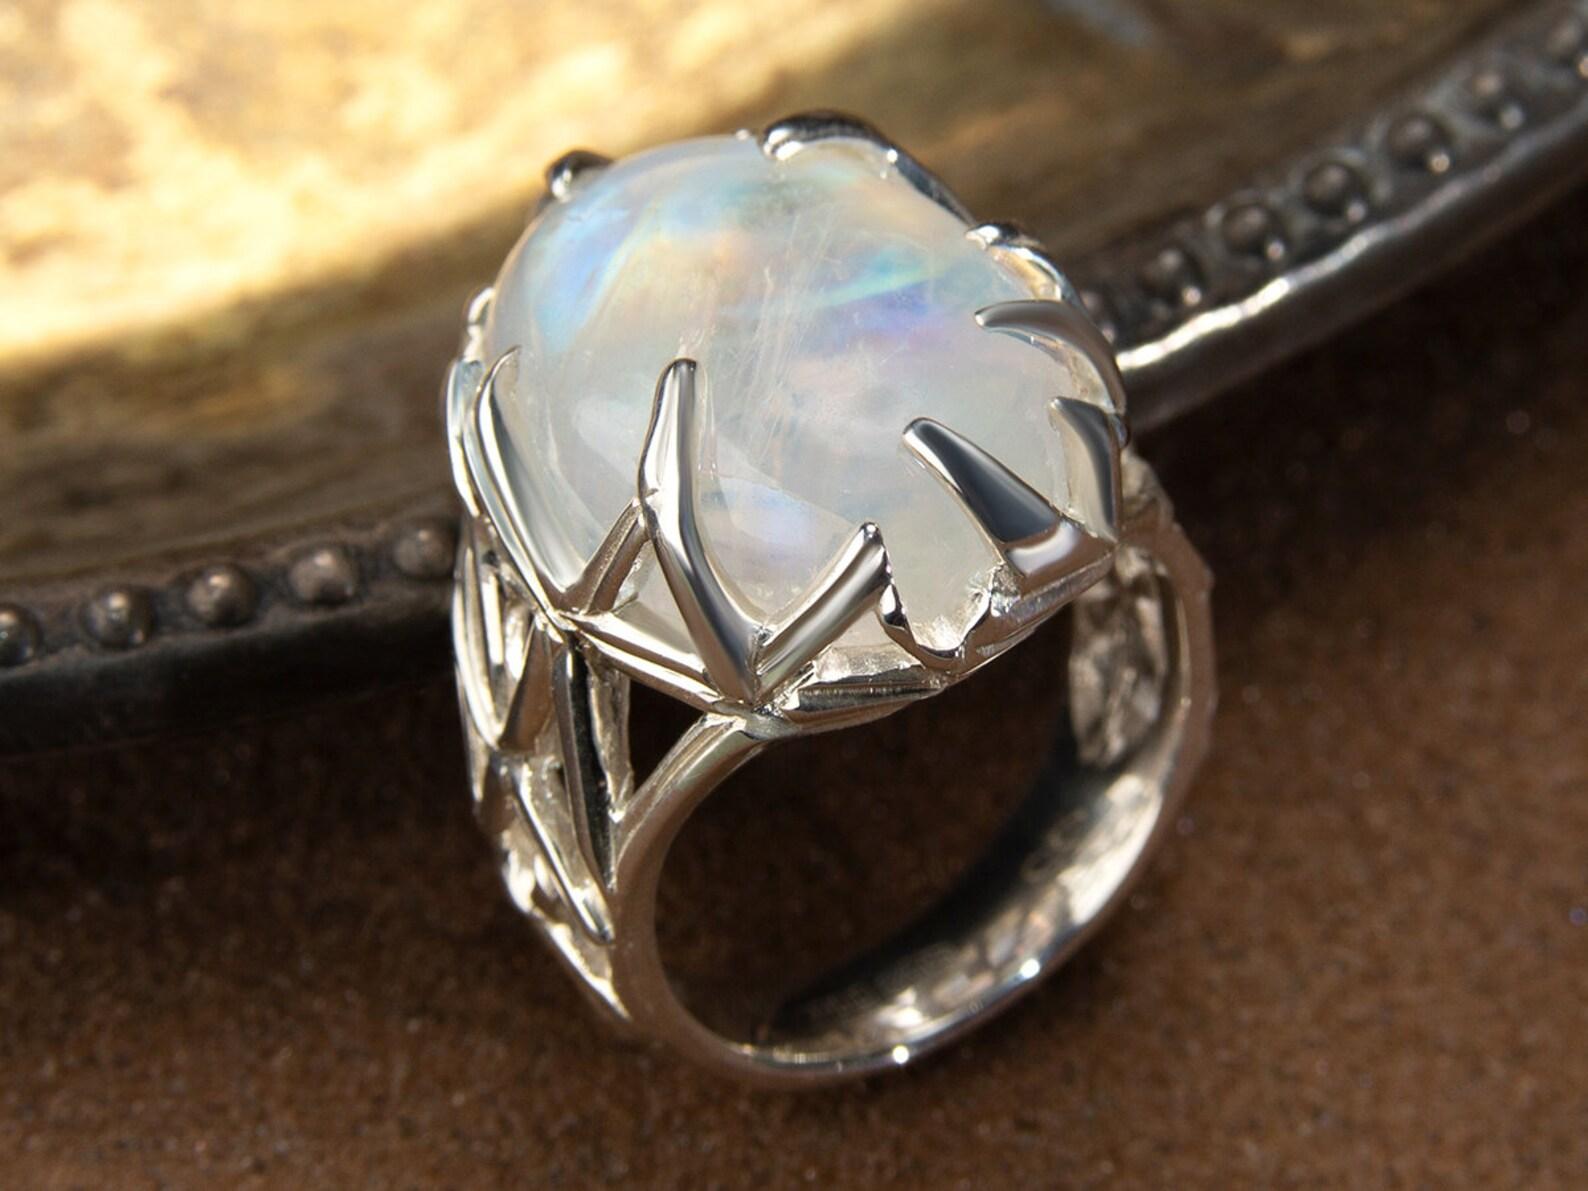 Artisan Big Moonstone Adularia Silver Ring Cabochon Translucent Pearly White Clear Stone For Sale